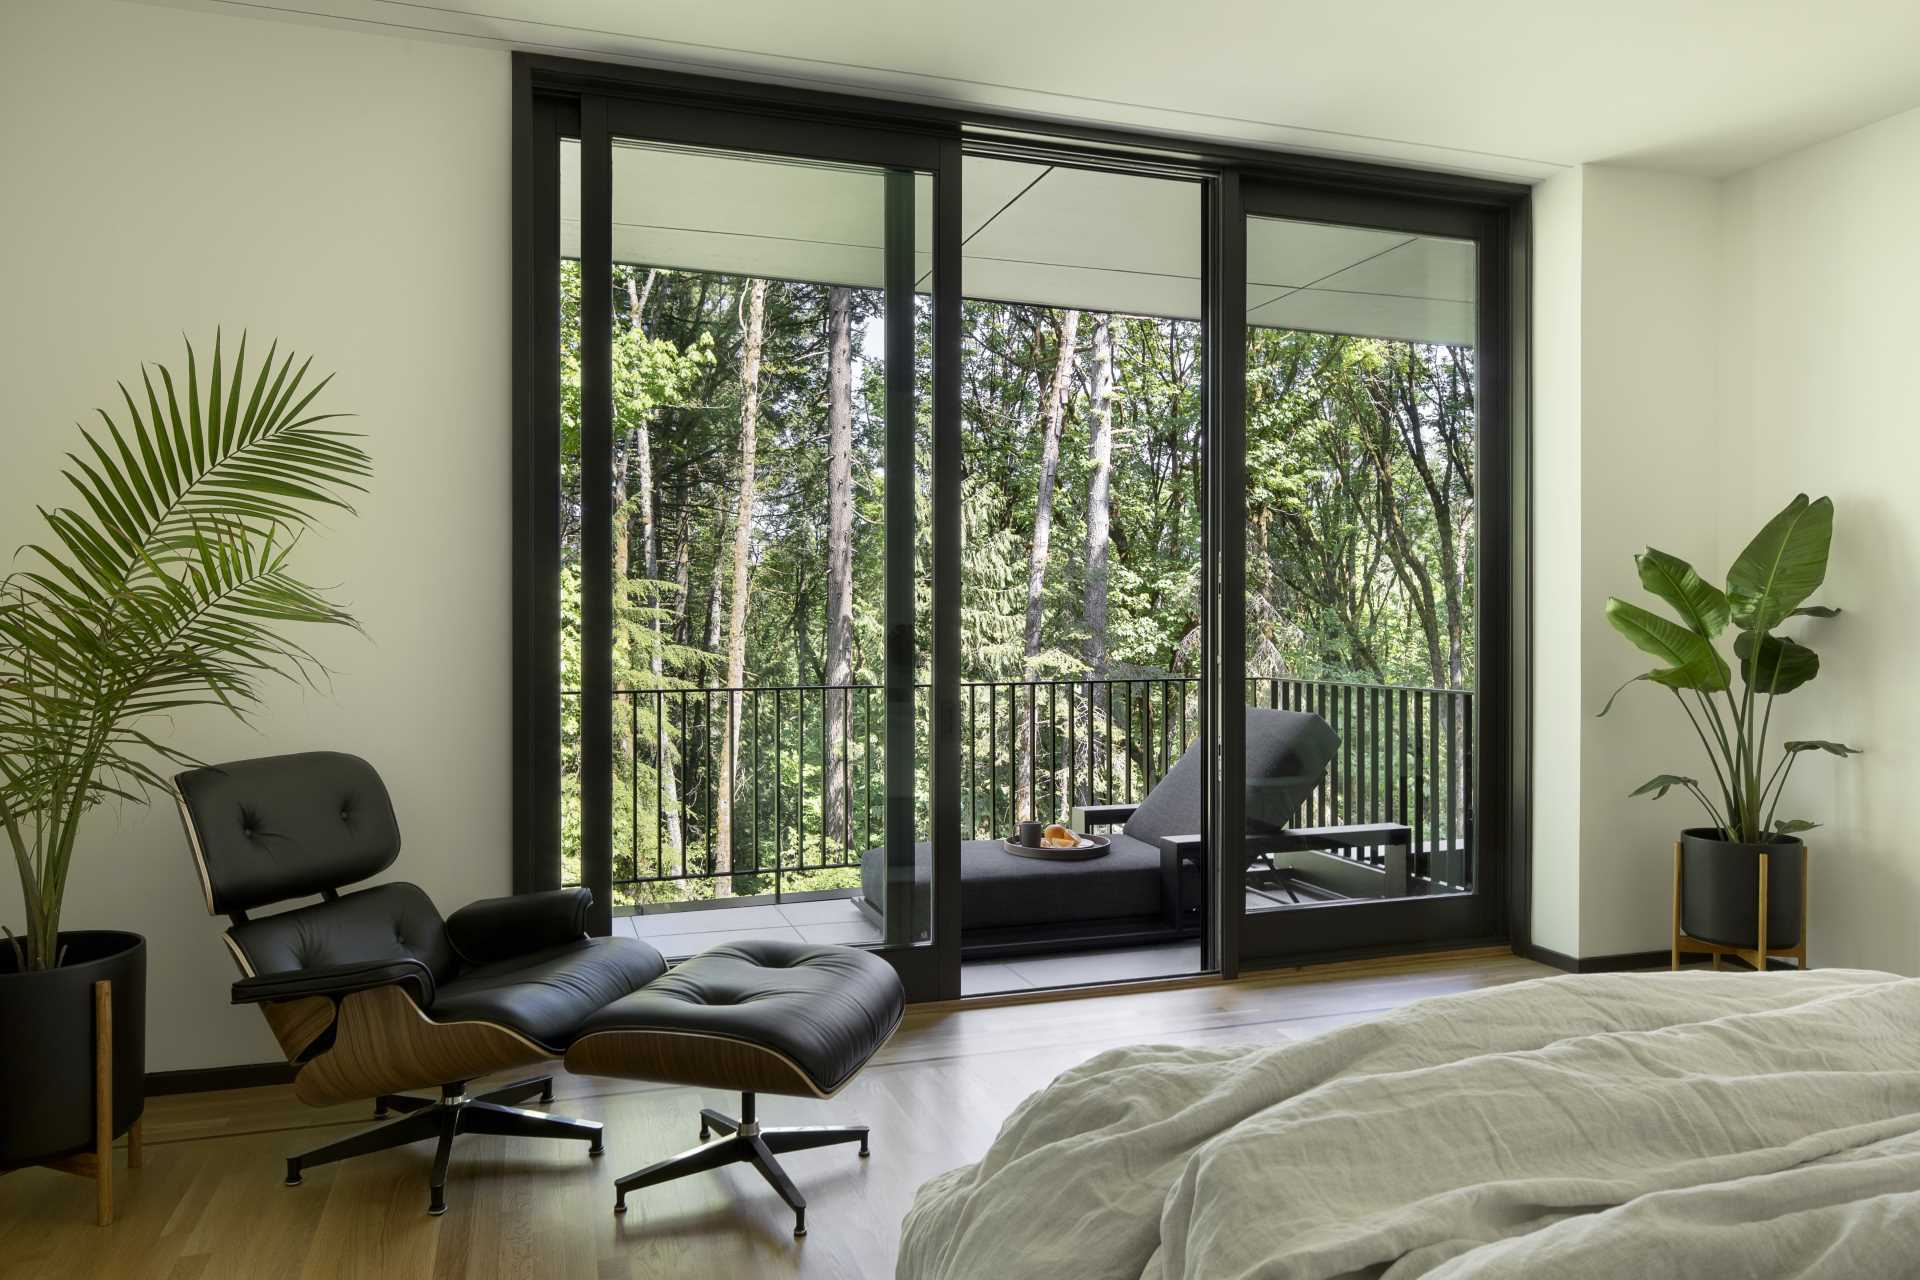 A modern primary bedroom with a sliding glass door that opens up to a private sun deck.